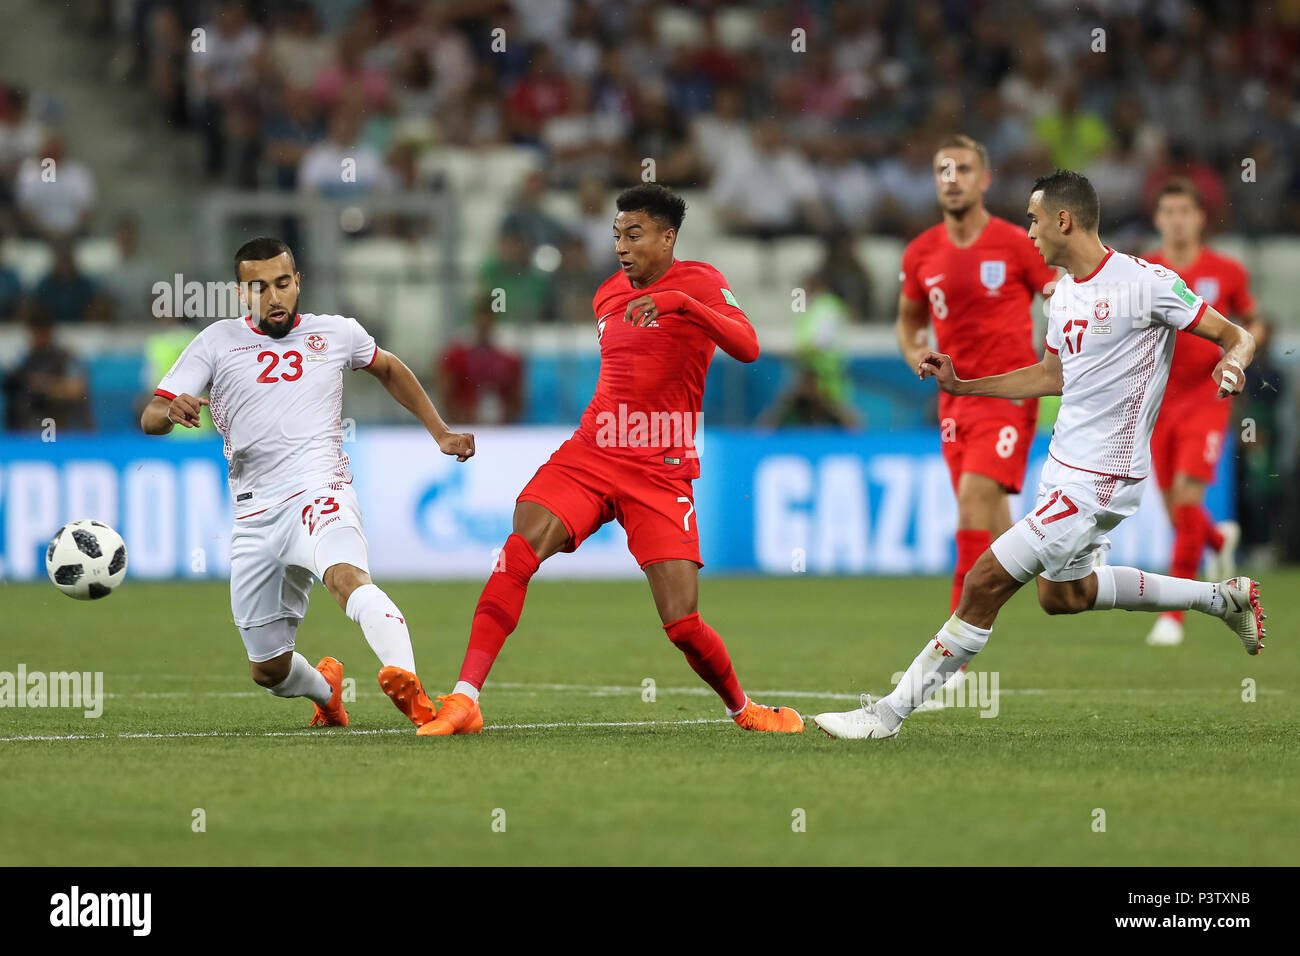 Volgograd, Russia. 18th Jun, 2018. Naim Sliti of Tunisia, Jesse Lingard of England and Ellyes Skhiri of Tunisia during the 2018 FIFA World Cup Group G match between Tunisia and England at Volgograd Arena on June 18th 2018 in Volgograd, Russia. (Photo by Daniel Chesterton/phcimages.com) Credit: PHC Images/Alamy Live News Stock Photo